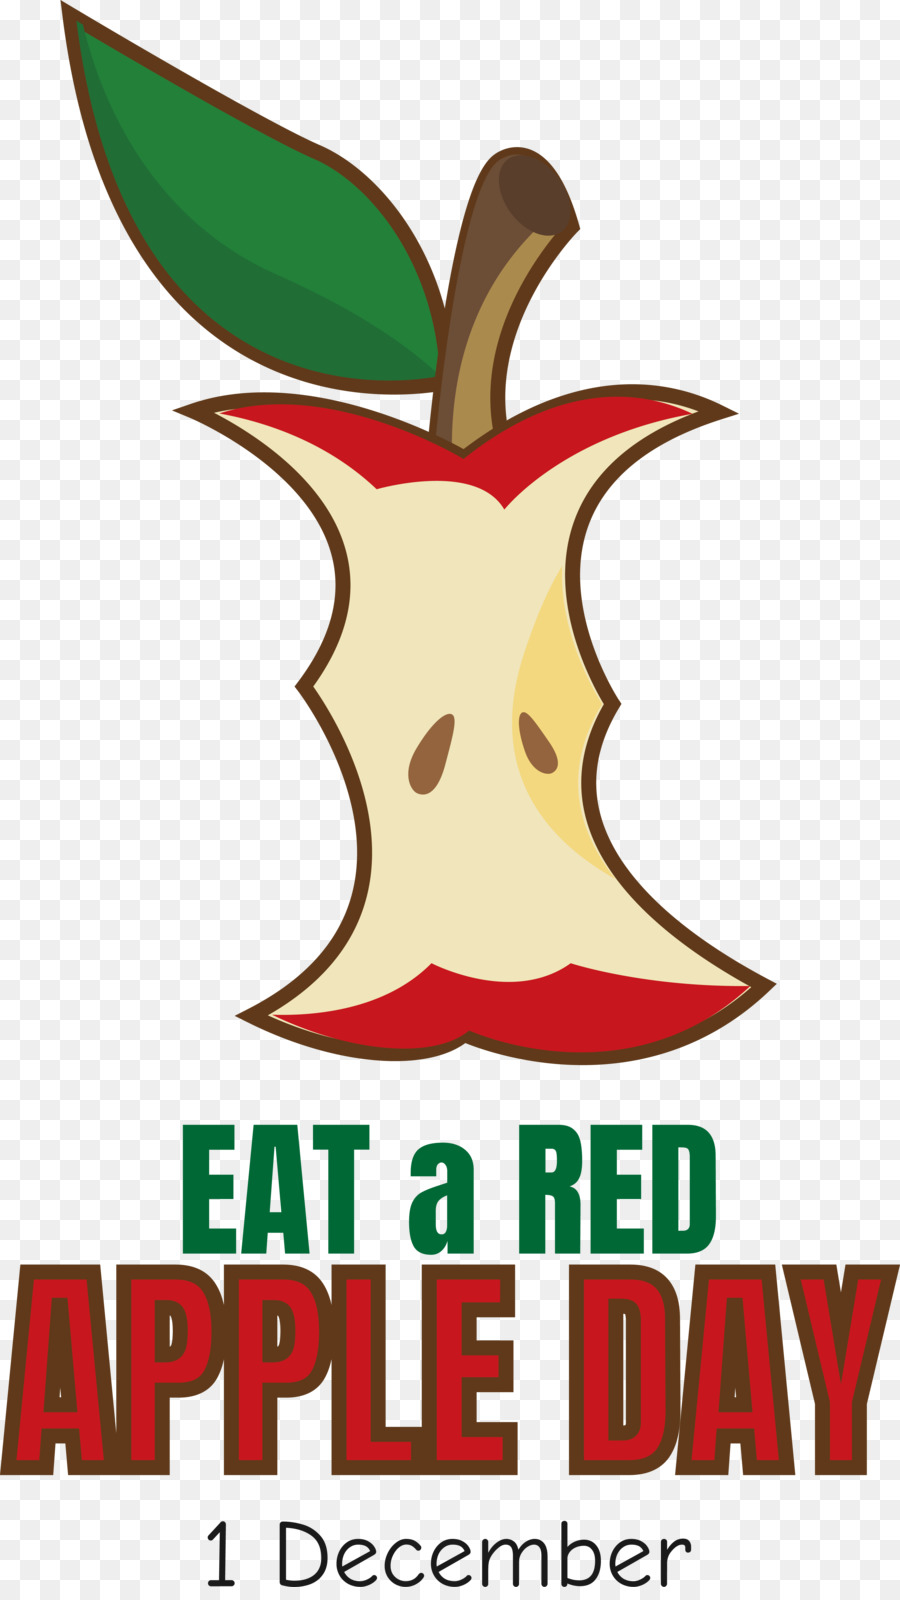 red apple eat a red apple day